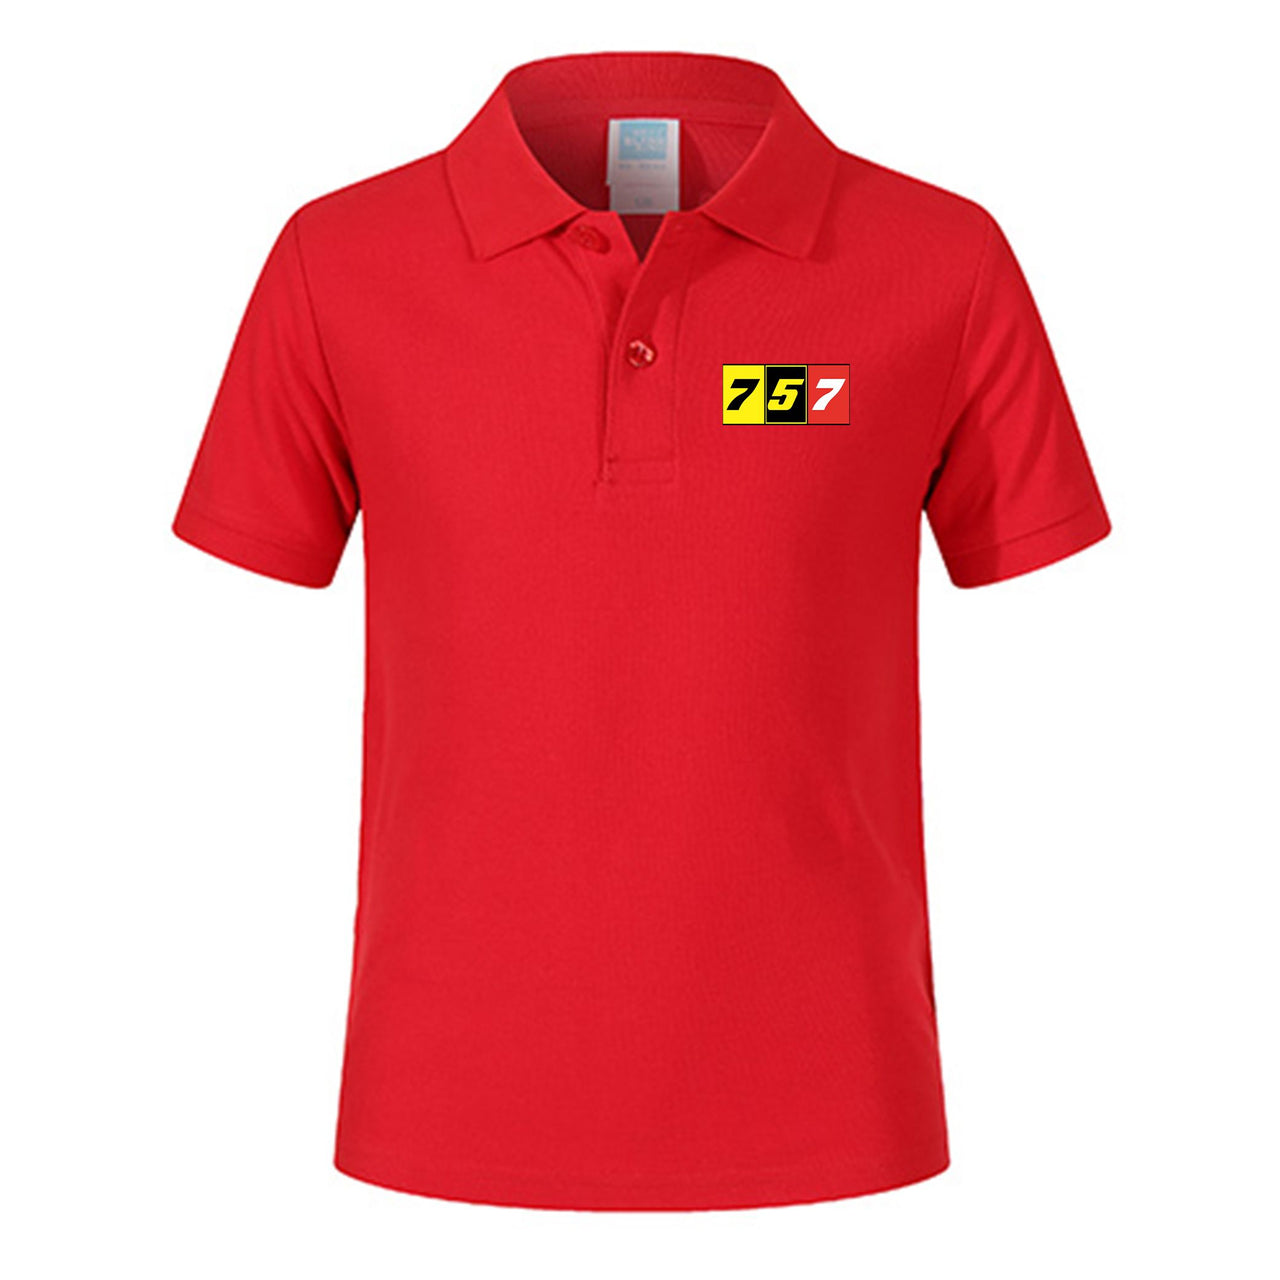 Flat Colourful 757 Designed Children Polo T-Shirts